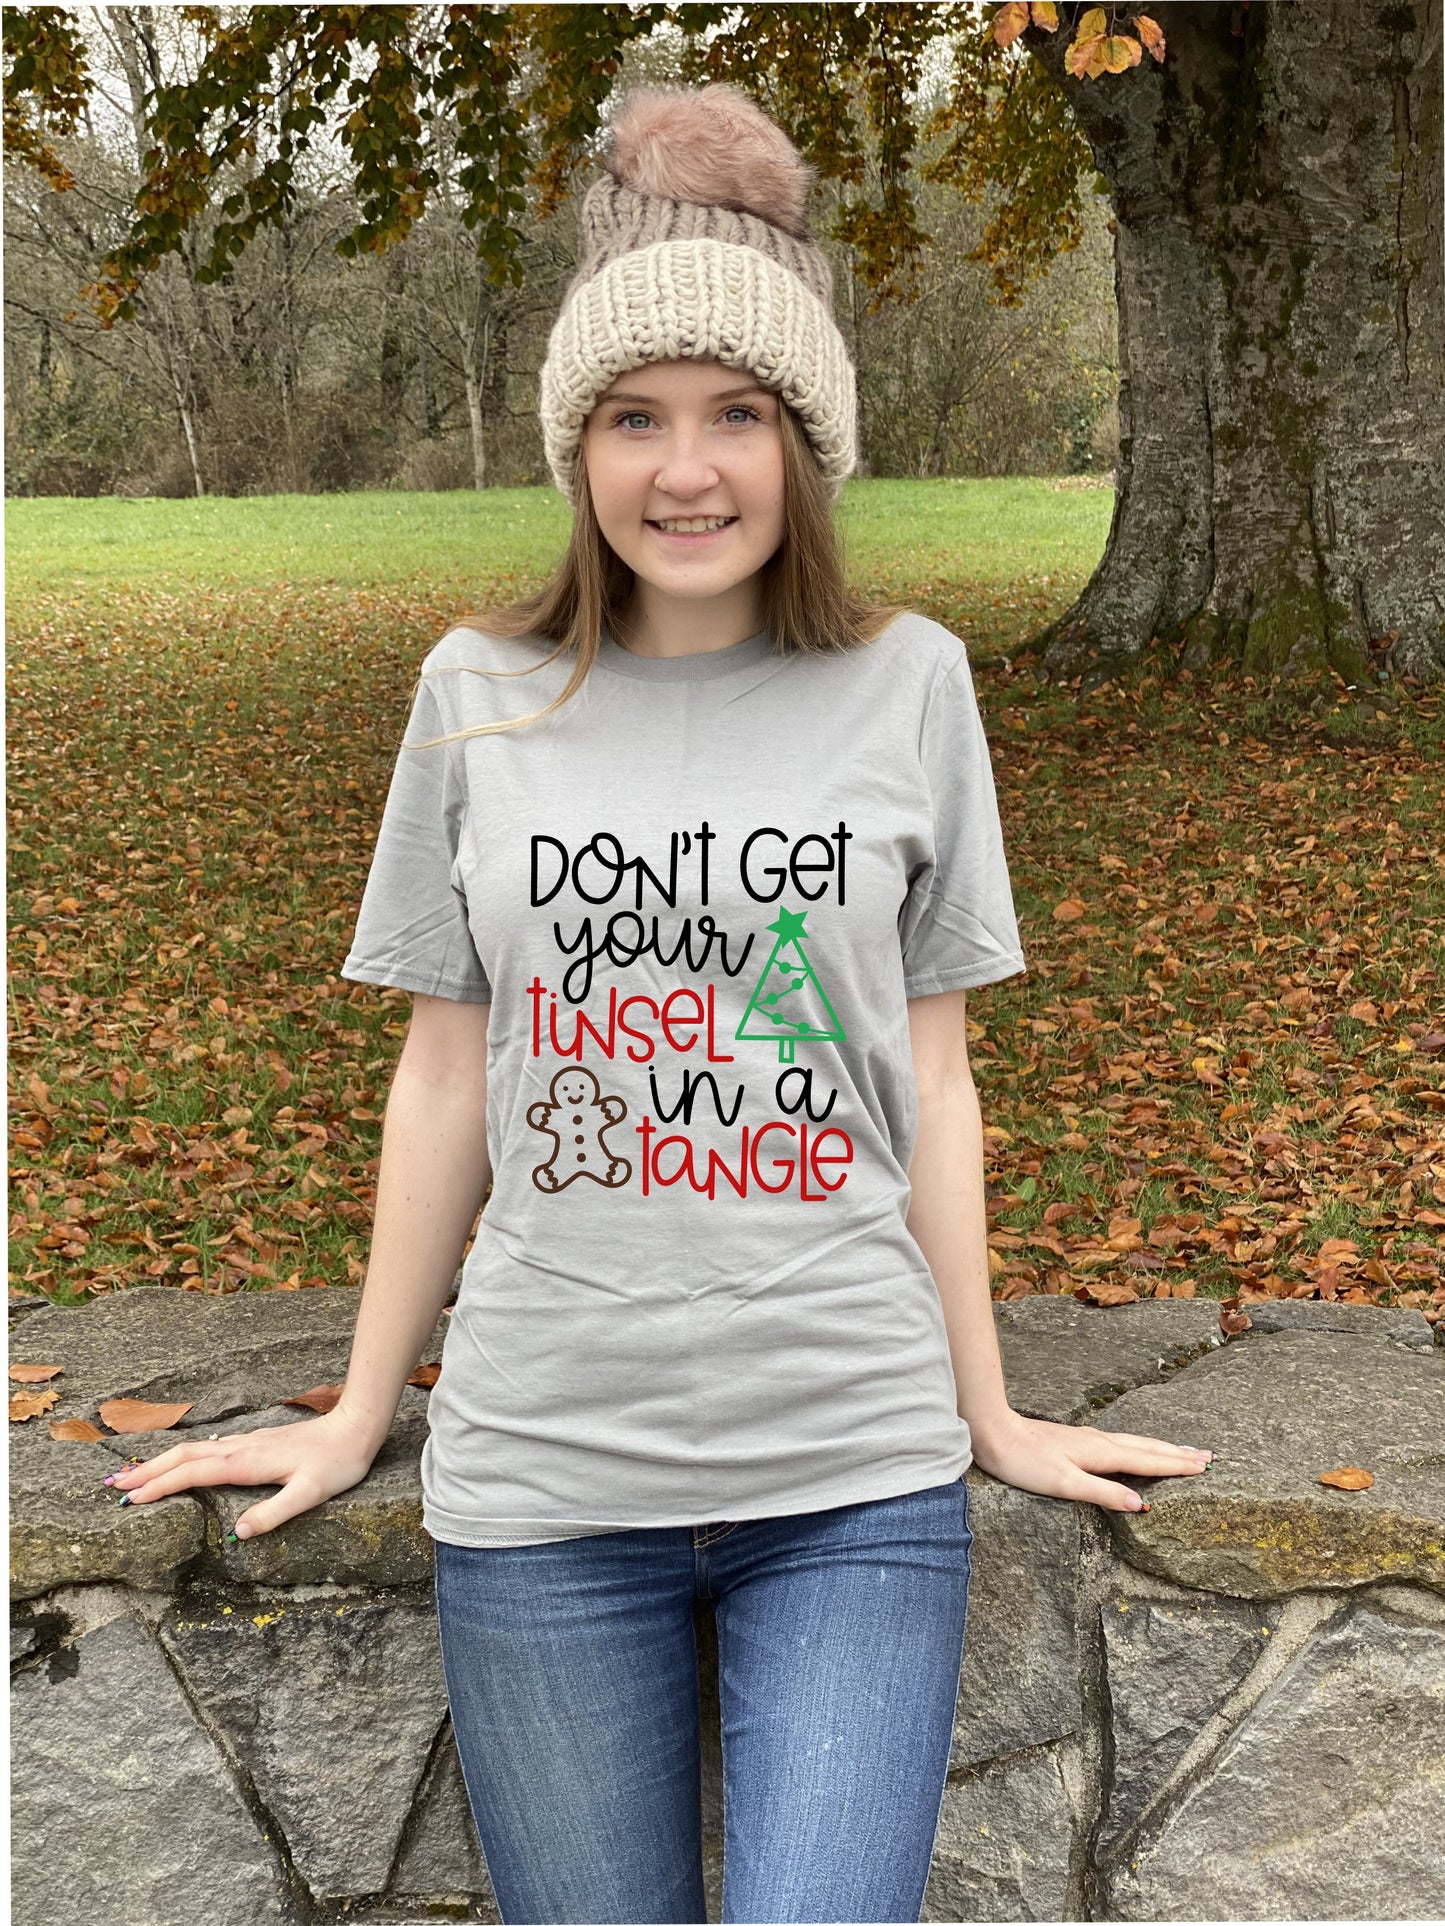 Fun, custom "Don't get your tinsel in a tangle" T-shirt